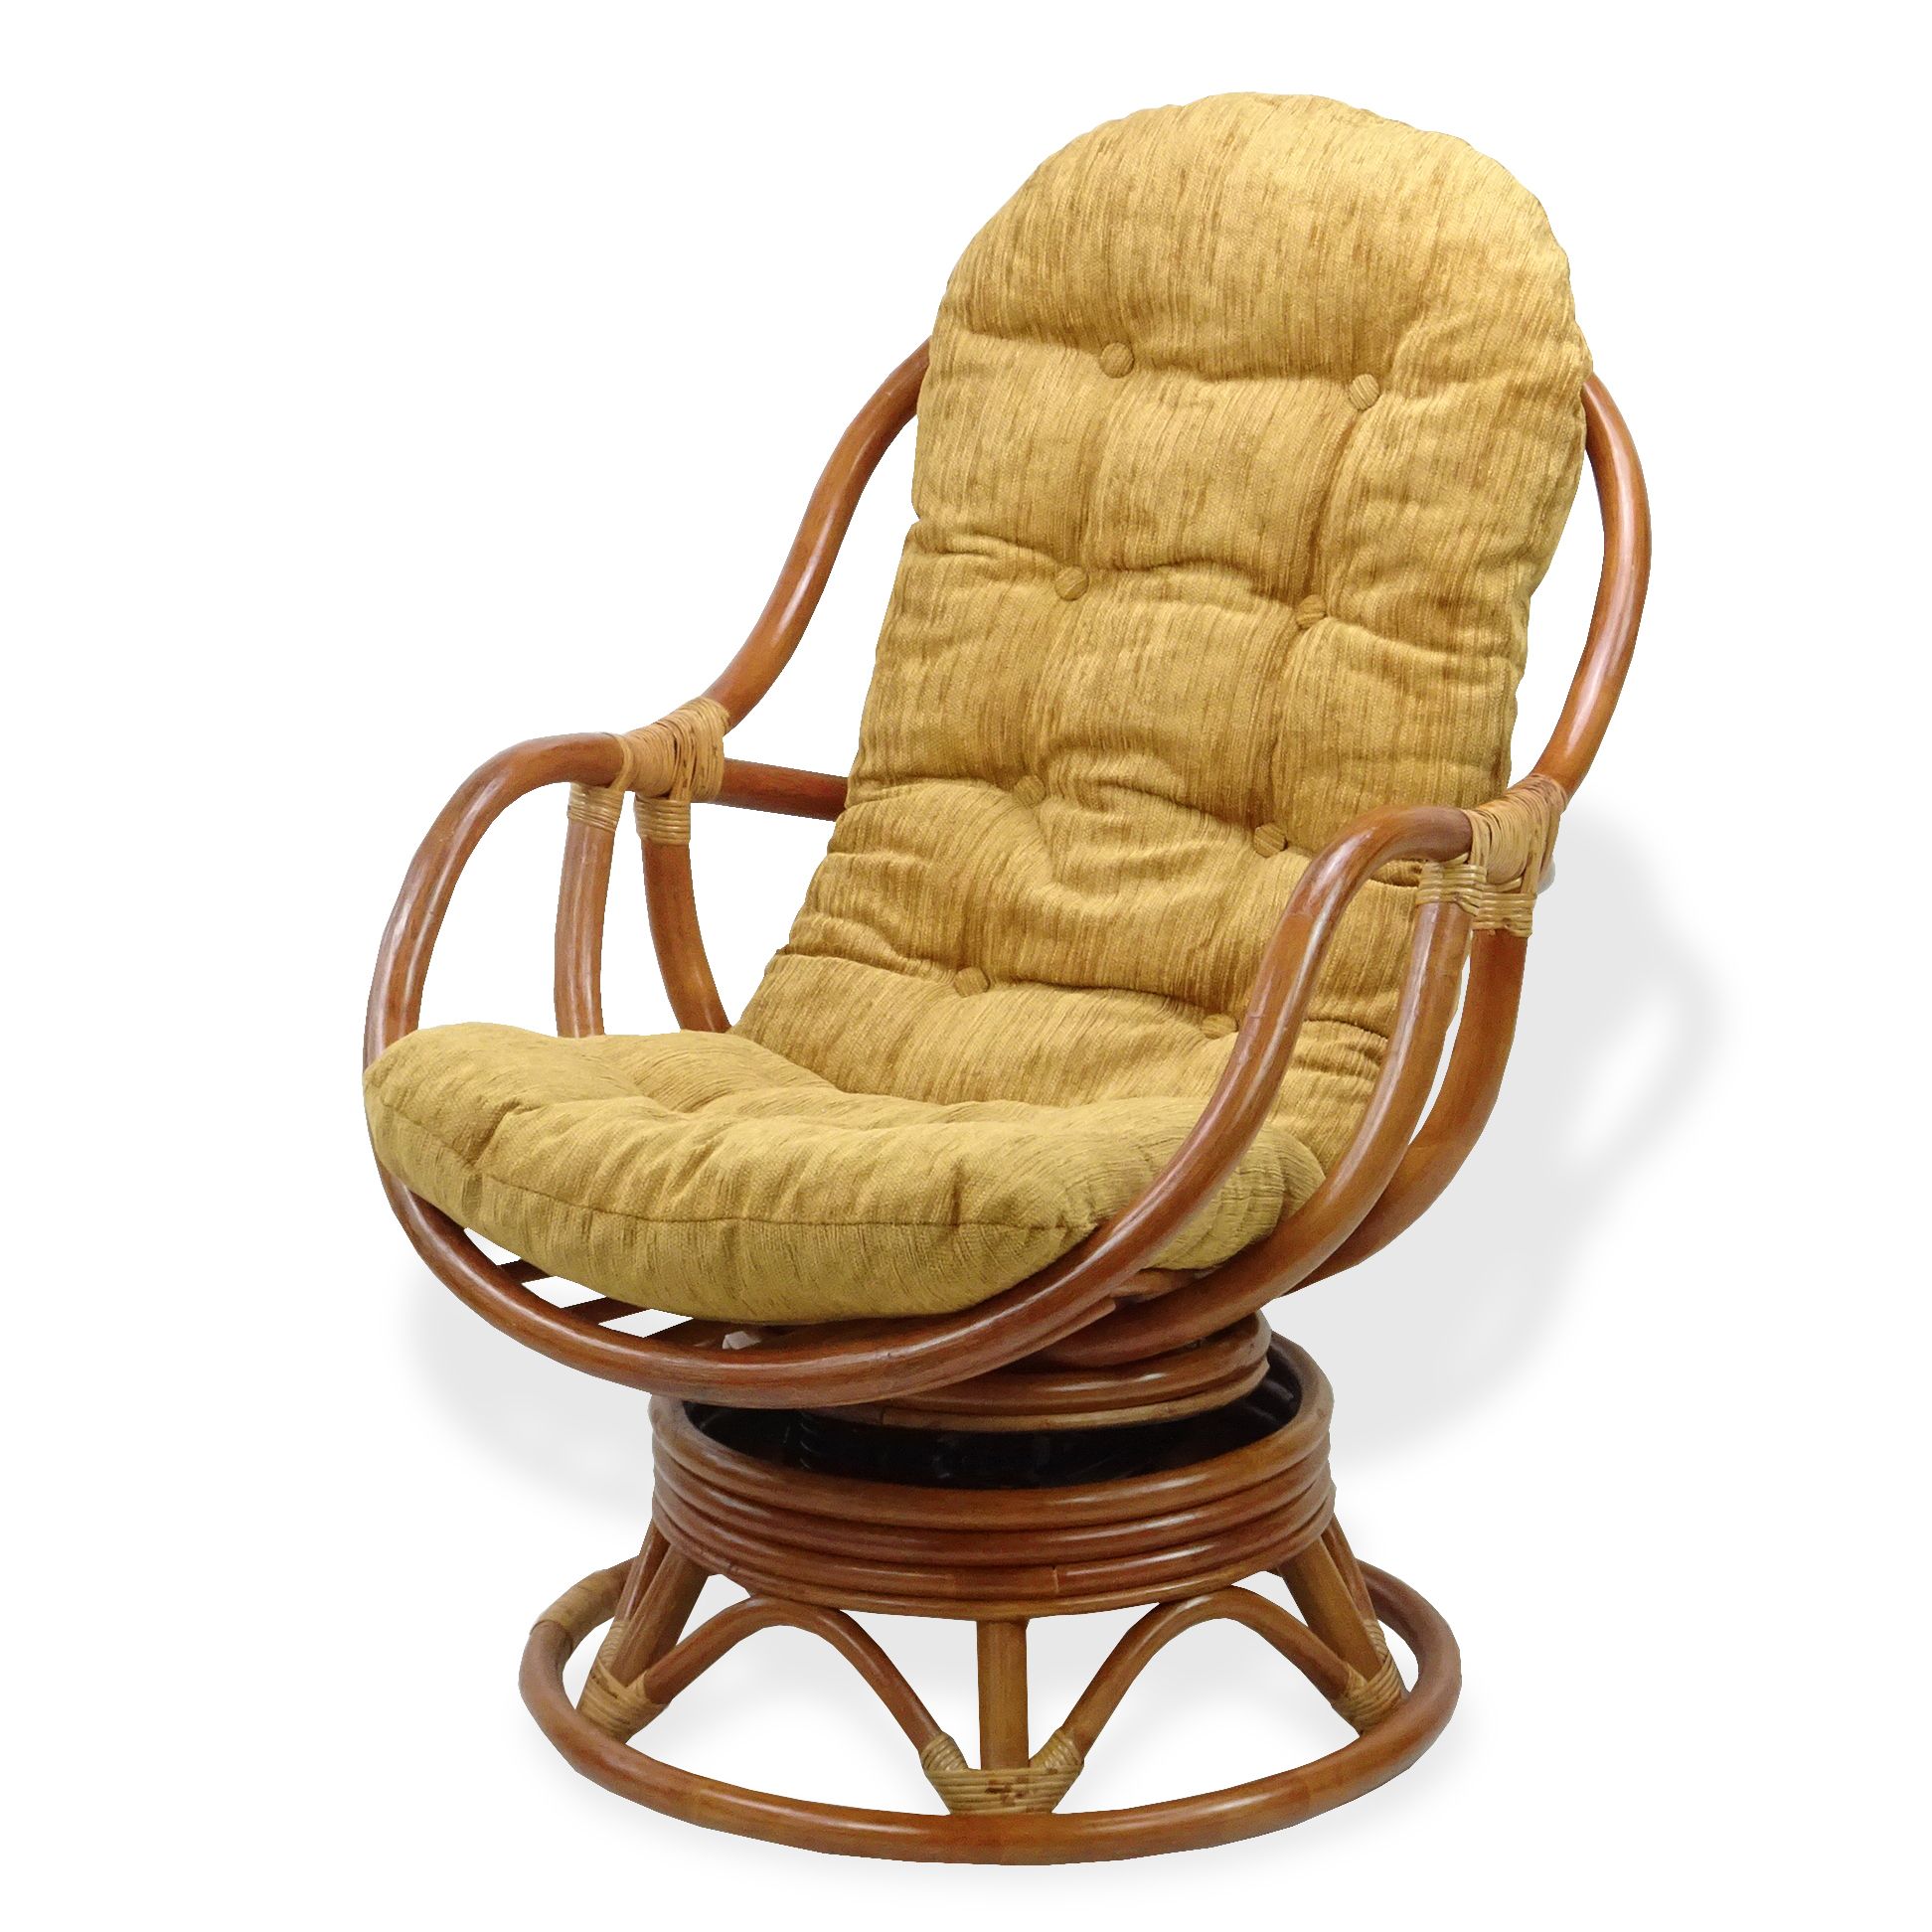 Bali Chair With Cream Cushion In Rocking Chairs, Cream And Brown (View 14 of 20)